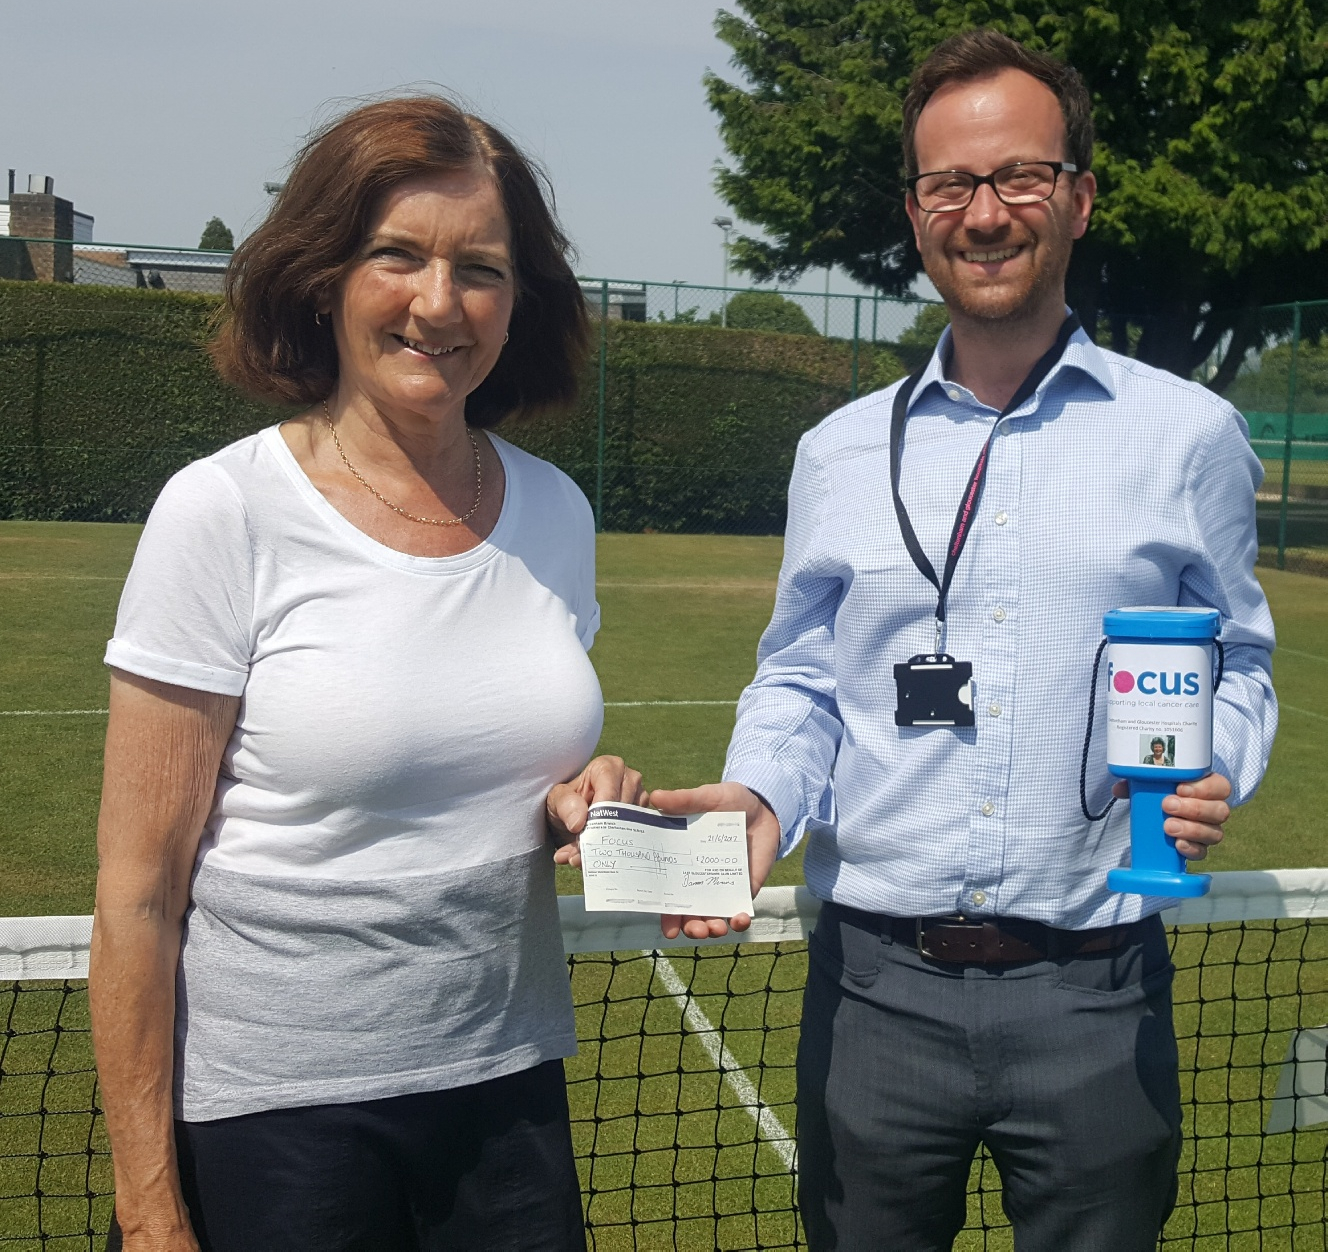 East Glos raises £2000 for local cancer charity in memory of former member Gill Green